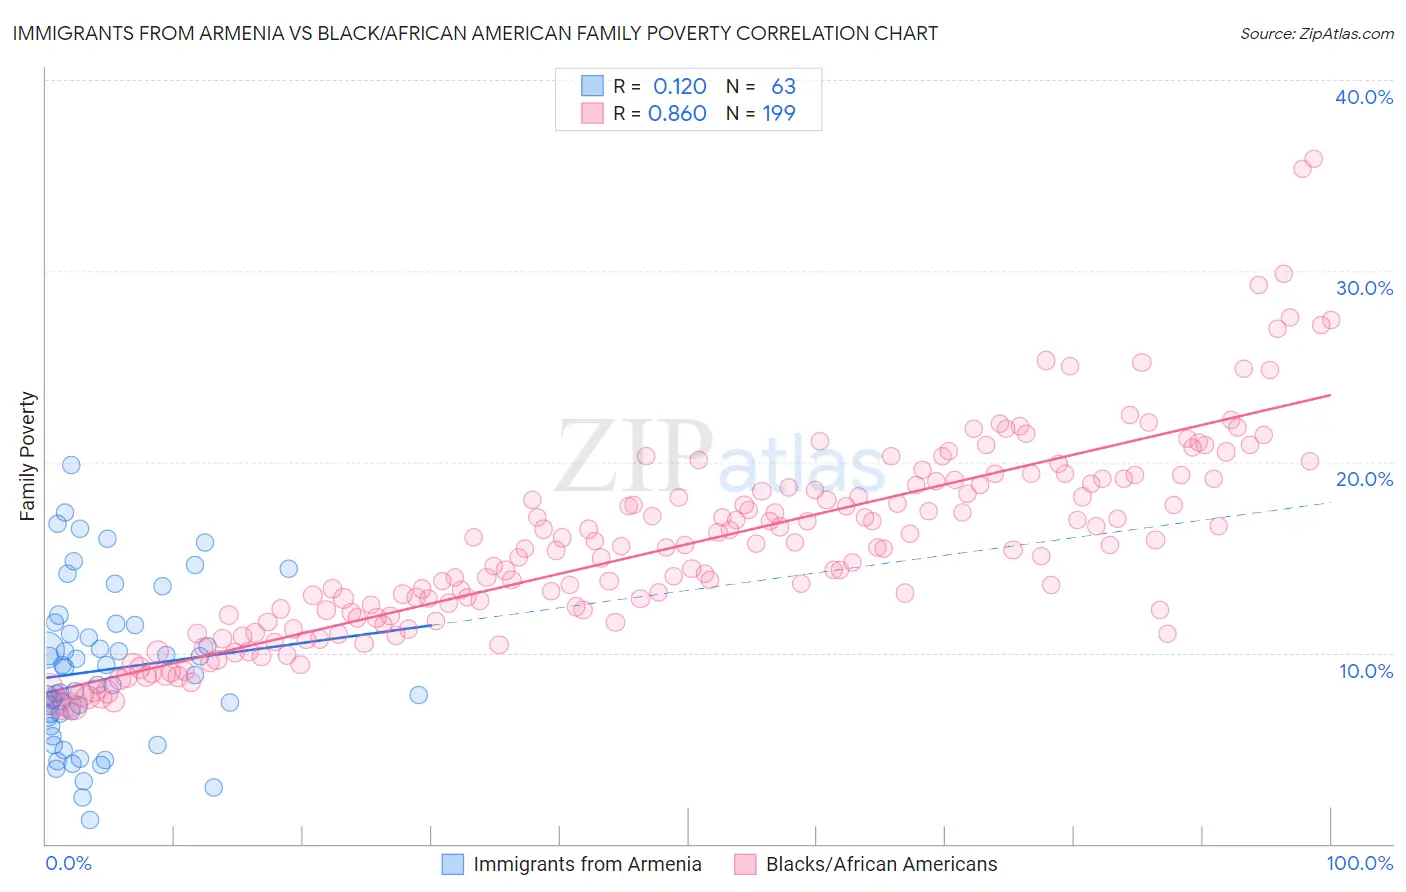 Immigrants from Armenia vs Black/African American Family Poverty